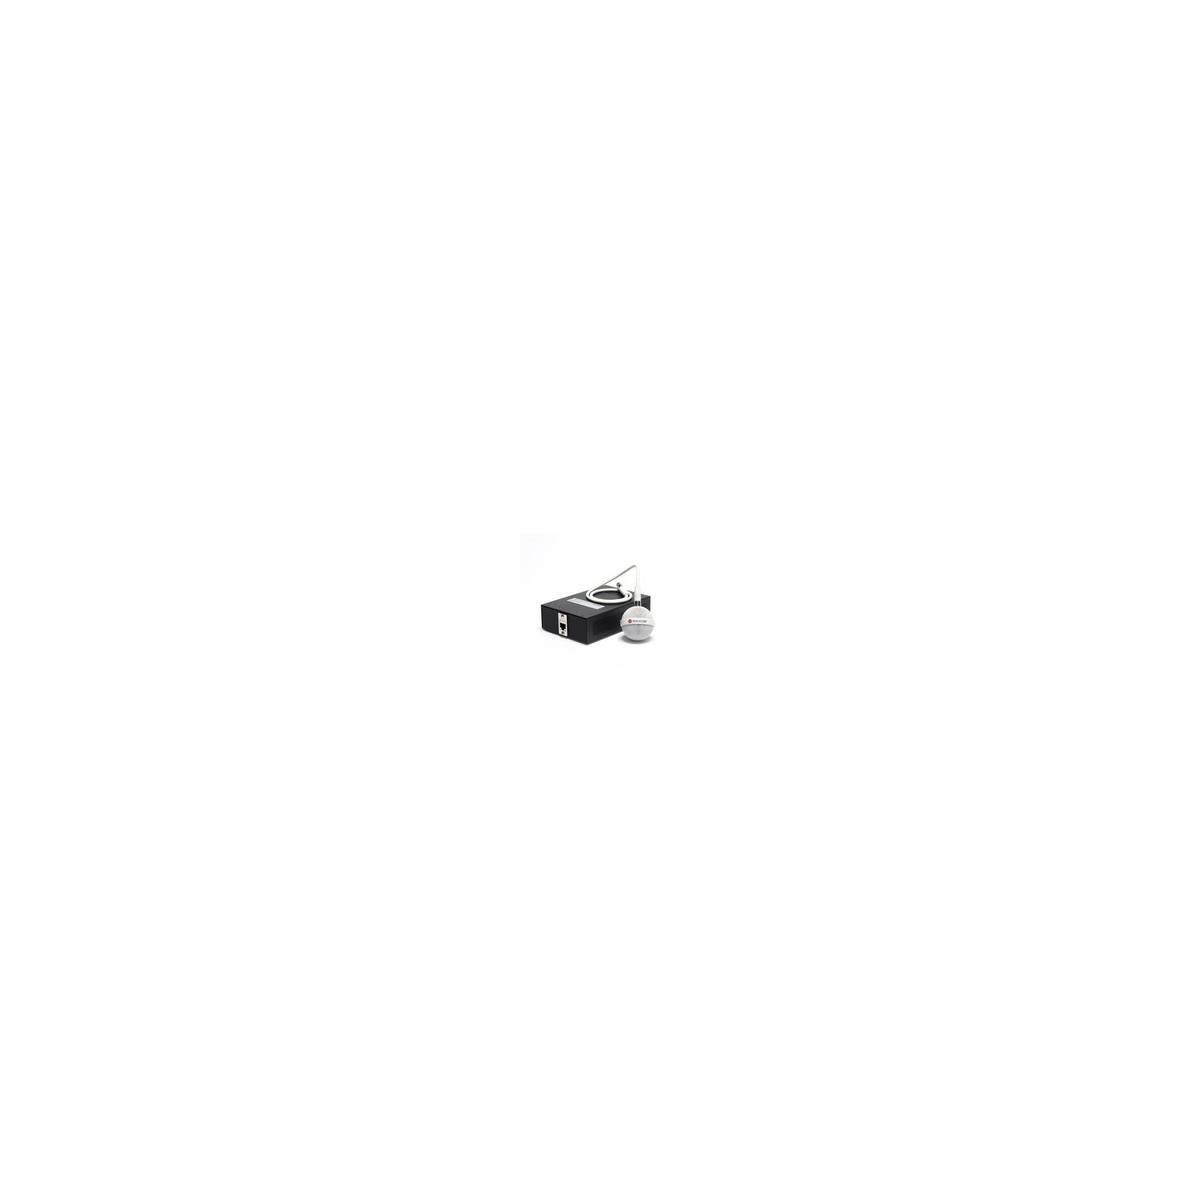 Poly 2200-23809-002 - Wired - Black,White - 0.6 m